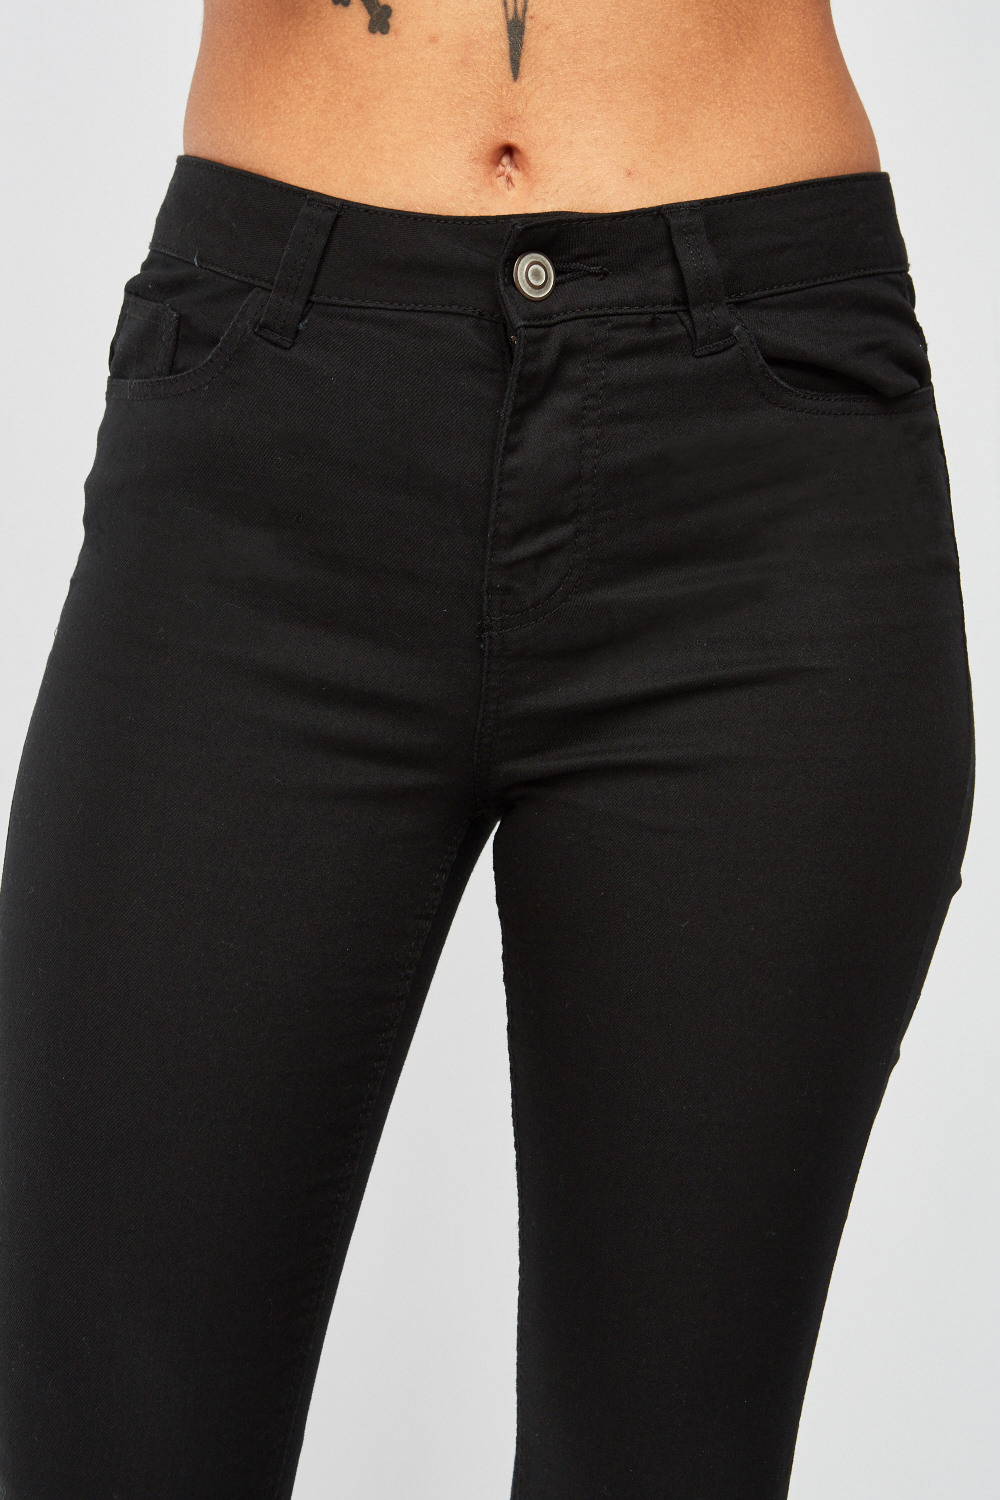 Skinny Fitted Black Jeans - Just $3